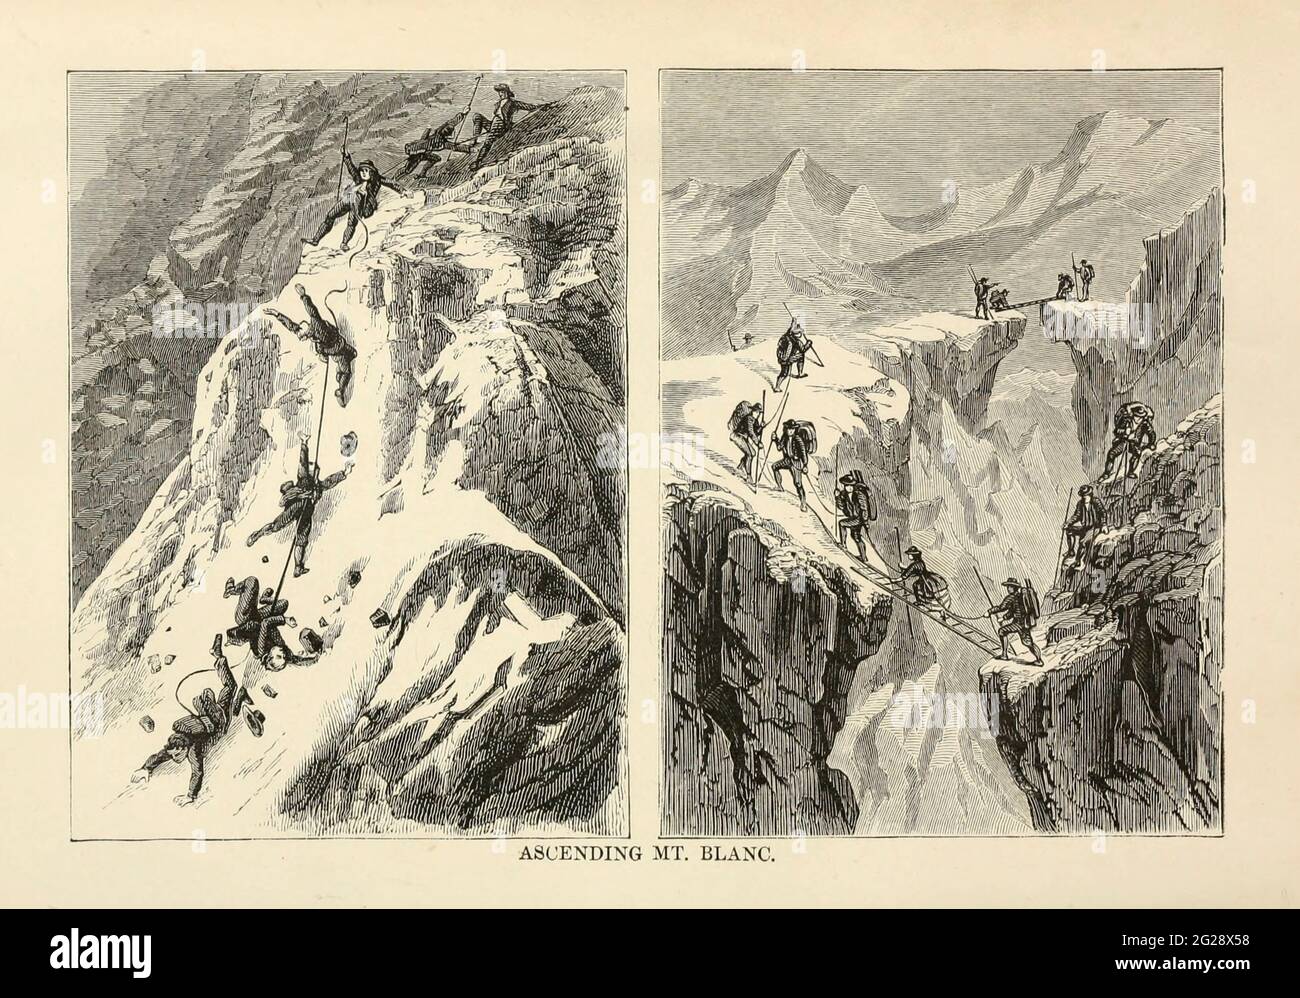 Climbing Mont Blanc from the book Sights and sensations in Europe : sketches of travel and adventure in England, Ireland, France, Spain, Portugal, Germany, Switzerland, Italy, Austria, Poland, Hungary, Holland, and Belgium : with an account of the places and persons prominent in the Franco-German war by Browne, Junius Henri, 1833-1902 Published by Hartford, Conn. : American Pub. Co. ; San Francisco, in 1871 Stock Photo